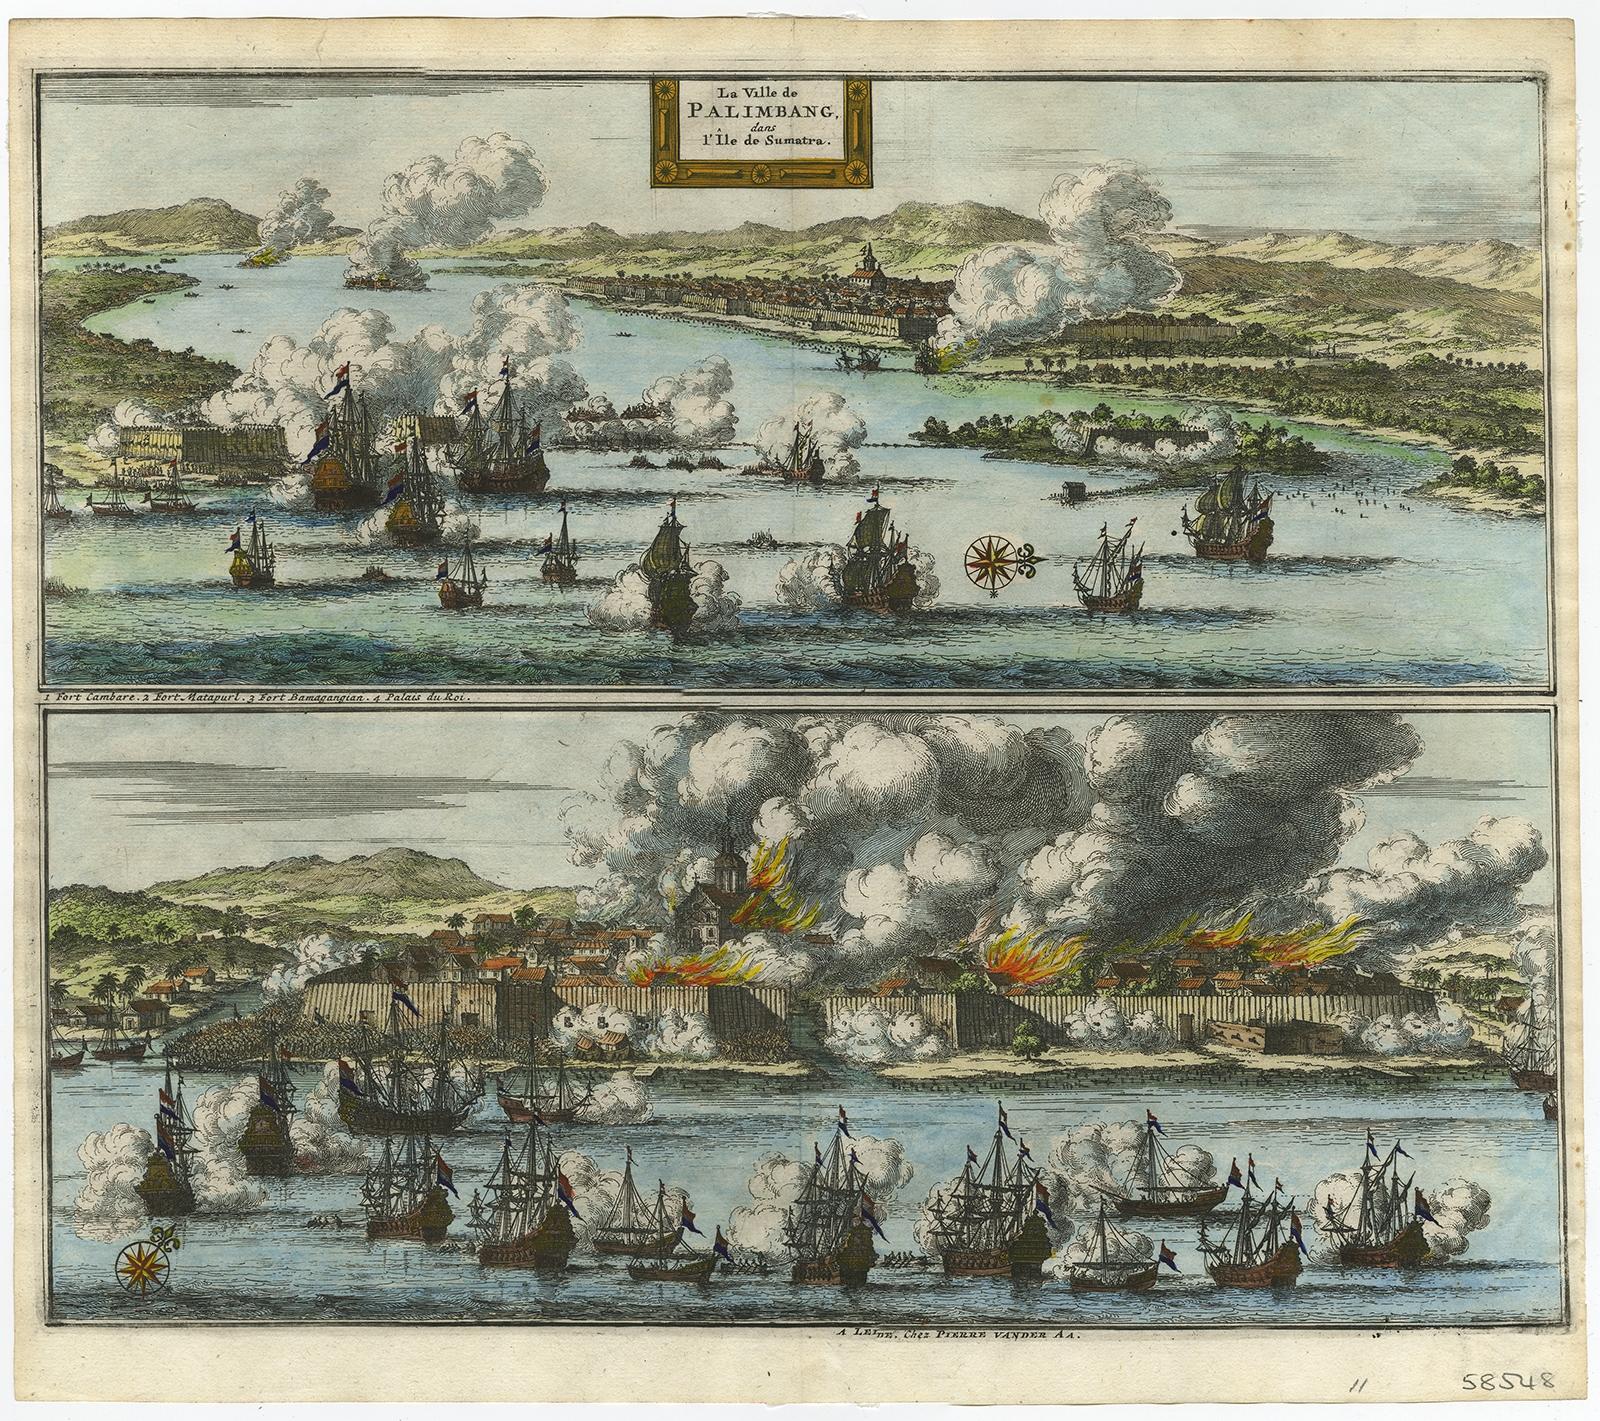 Antique print titled 'La Ville de Palimbang dans L’Ile de Sumatra.' 

A very decorative, impressive engraving of Palembang in Sumatra. Two views on one sheet. In the upper part the overall view with a sea battle in the foreground. Below the